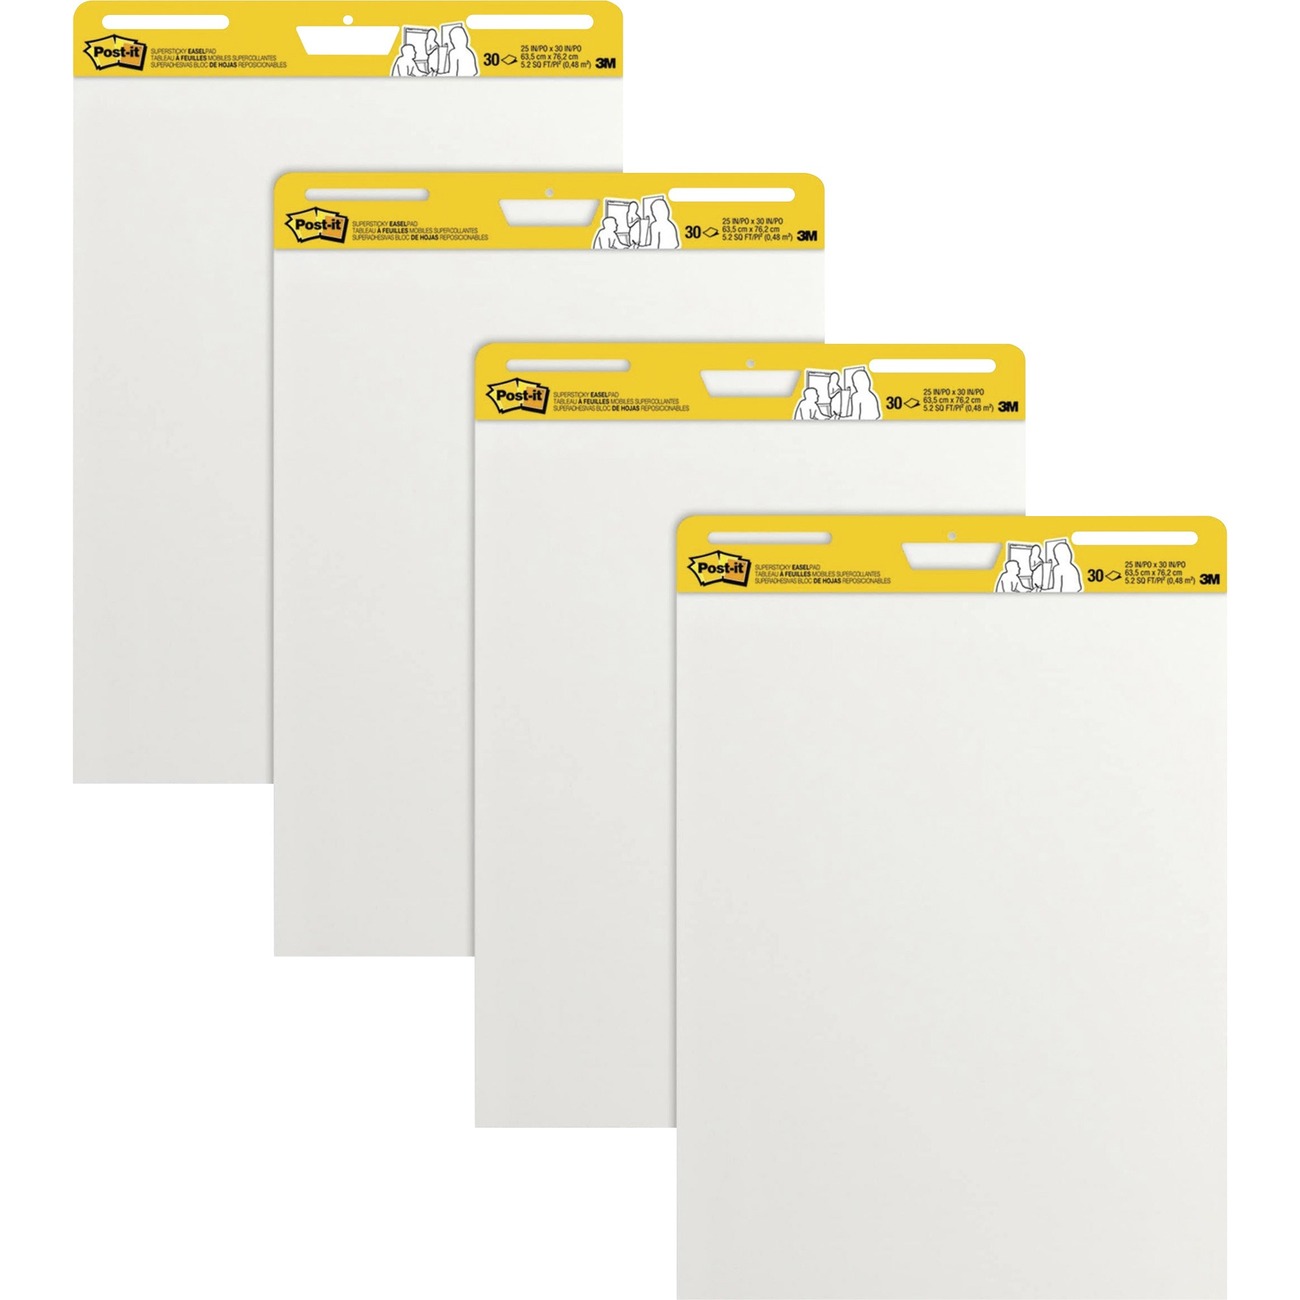 Vertical-Orientation Self-Stick Easel Pad Value Pack by Post-it® Easel Pads  Super Sticky MMM561VAD4PK